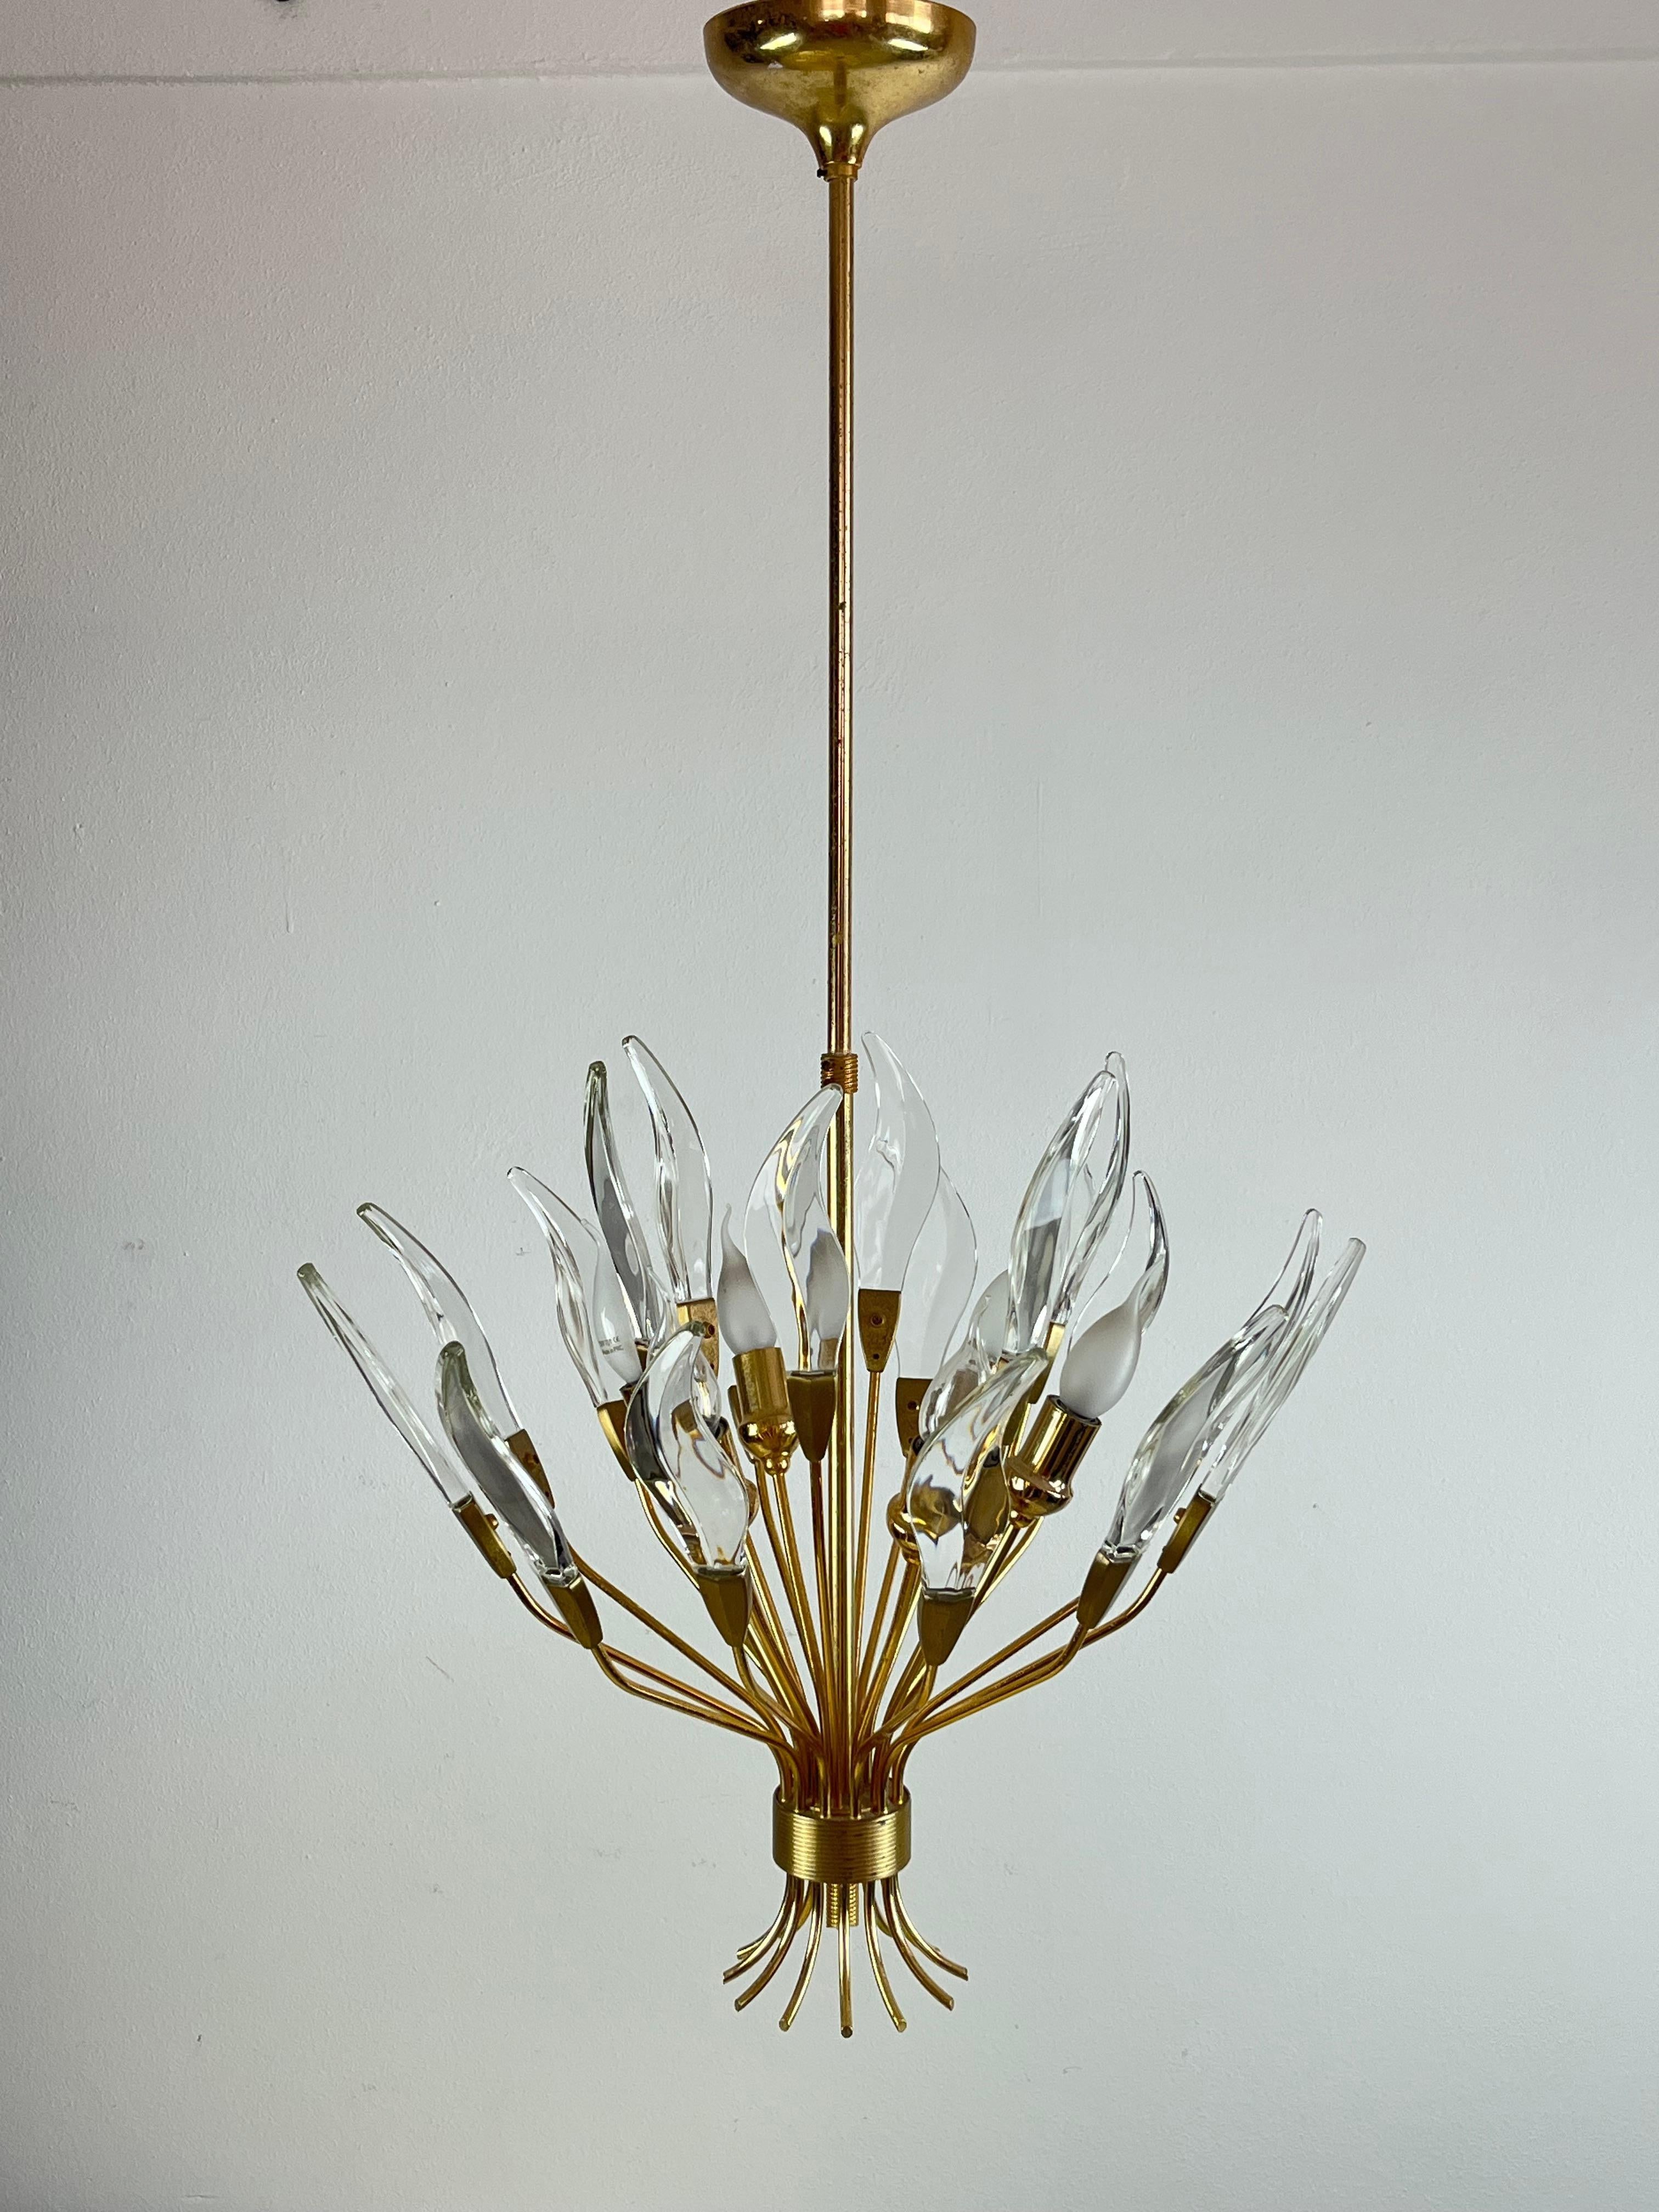 Vintage 6 Light Chandelier in gilt metal and Murano glass, Italy, 70s
Found in a noble apartment.
It has oxidation and a glass is missing as can be seen from the photographs in the description.